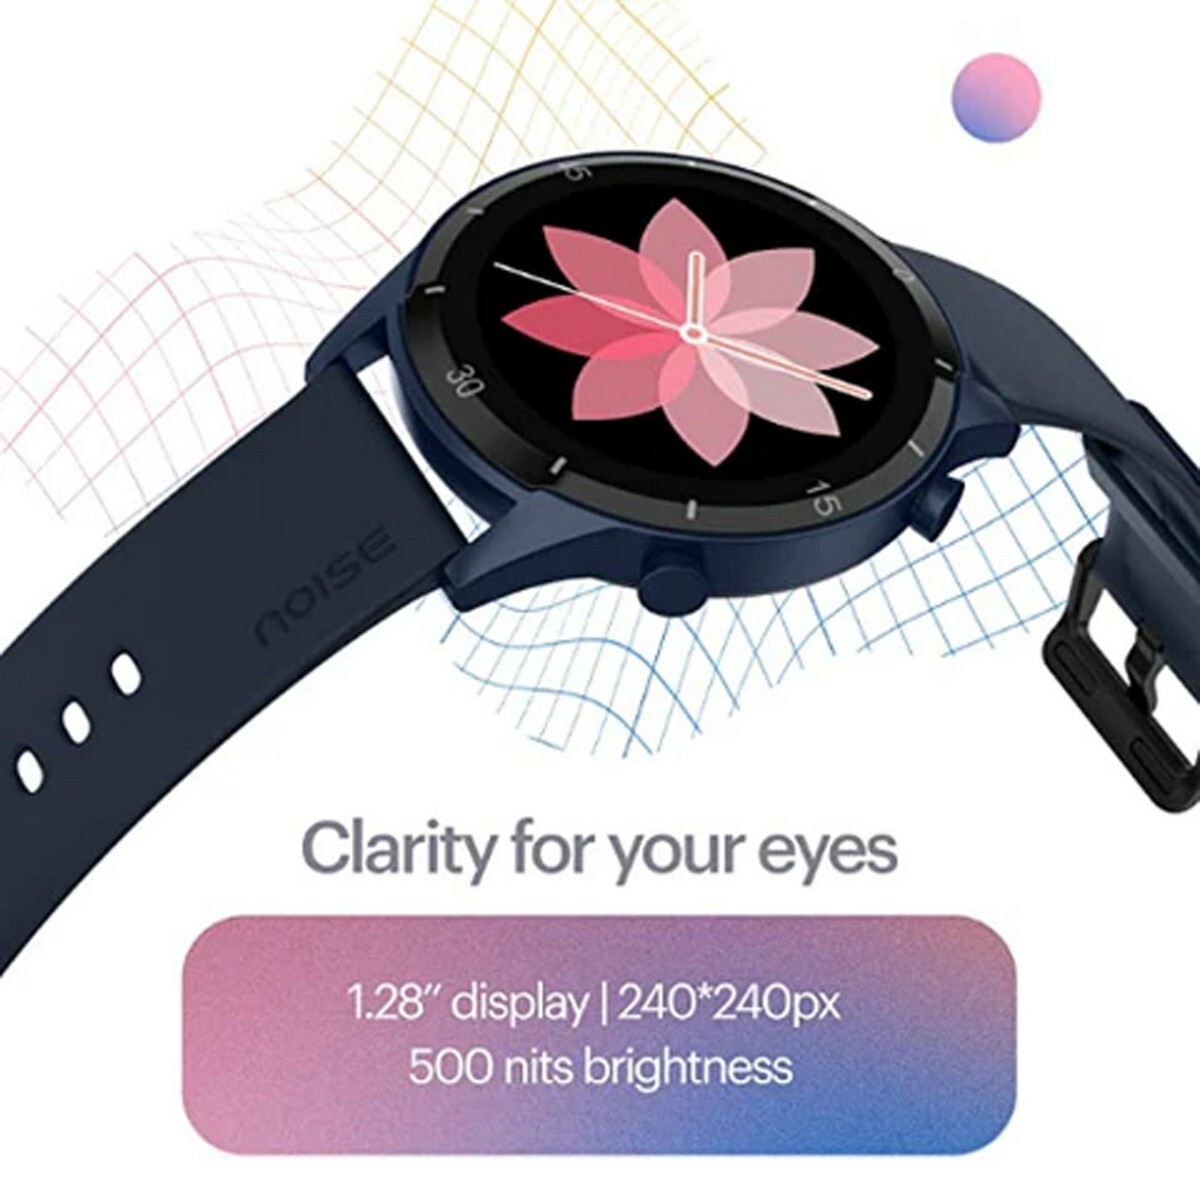 Noise Agile 2 Buzz Smart Watch Rose Pink